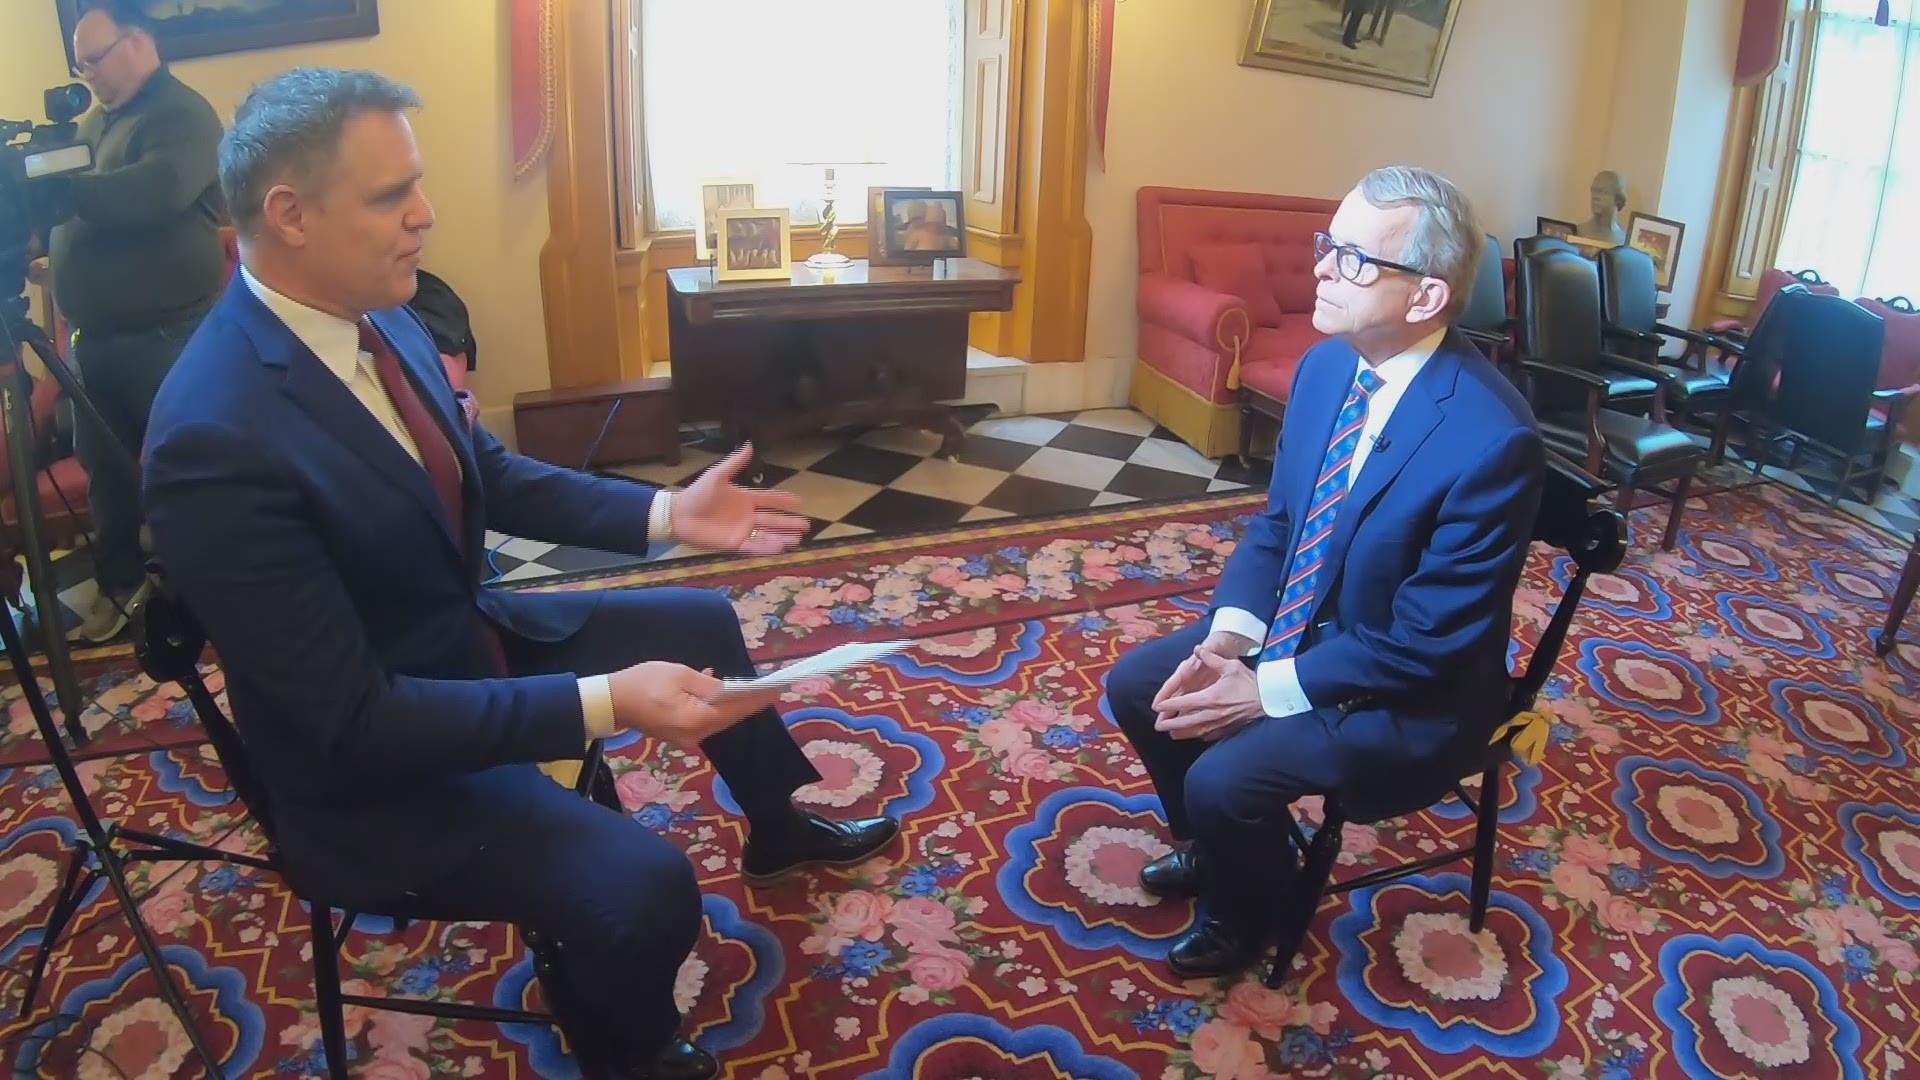 DeWine discussed his biggest successes and challenges as governor. Jay also asked about the impeachment inquiry into President Donald Trump, a DeWine ally.